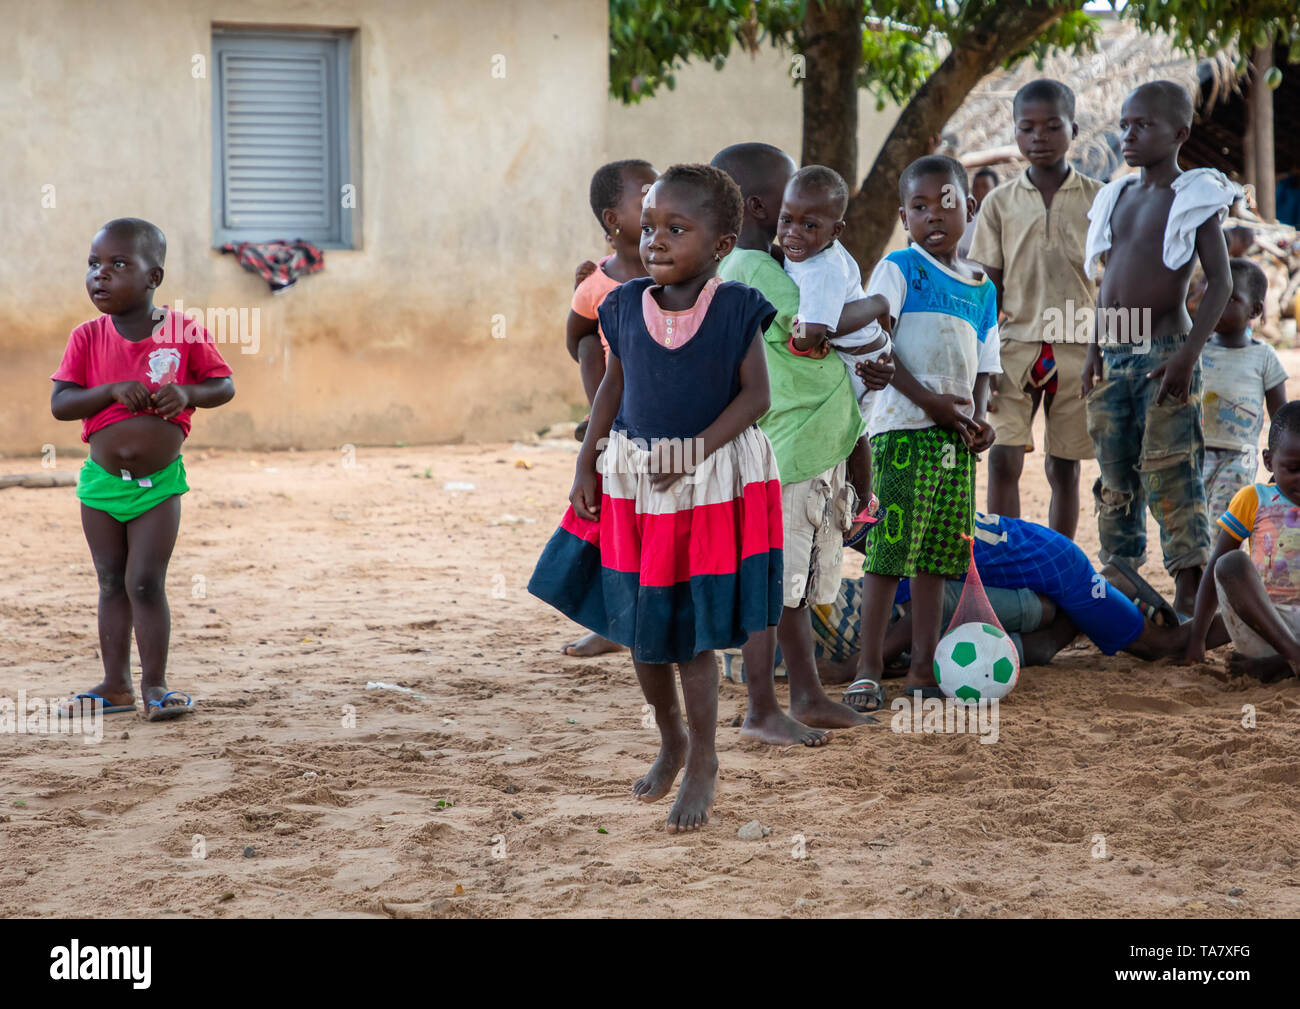 Children in the courtyard of a village, Région des Lacs, Bomizanbo, Ivory Coast Stock Photo